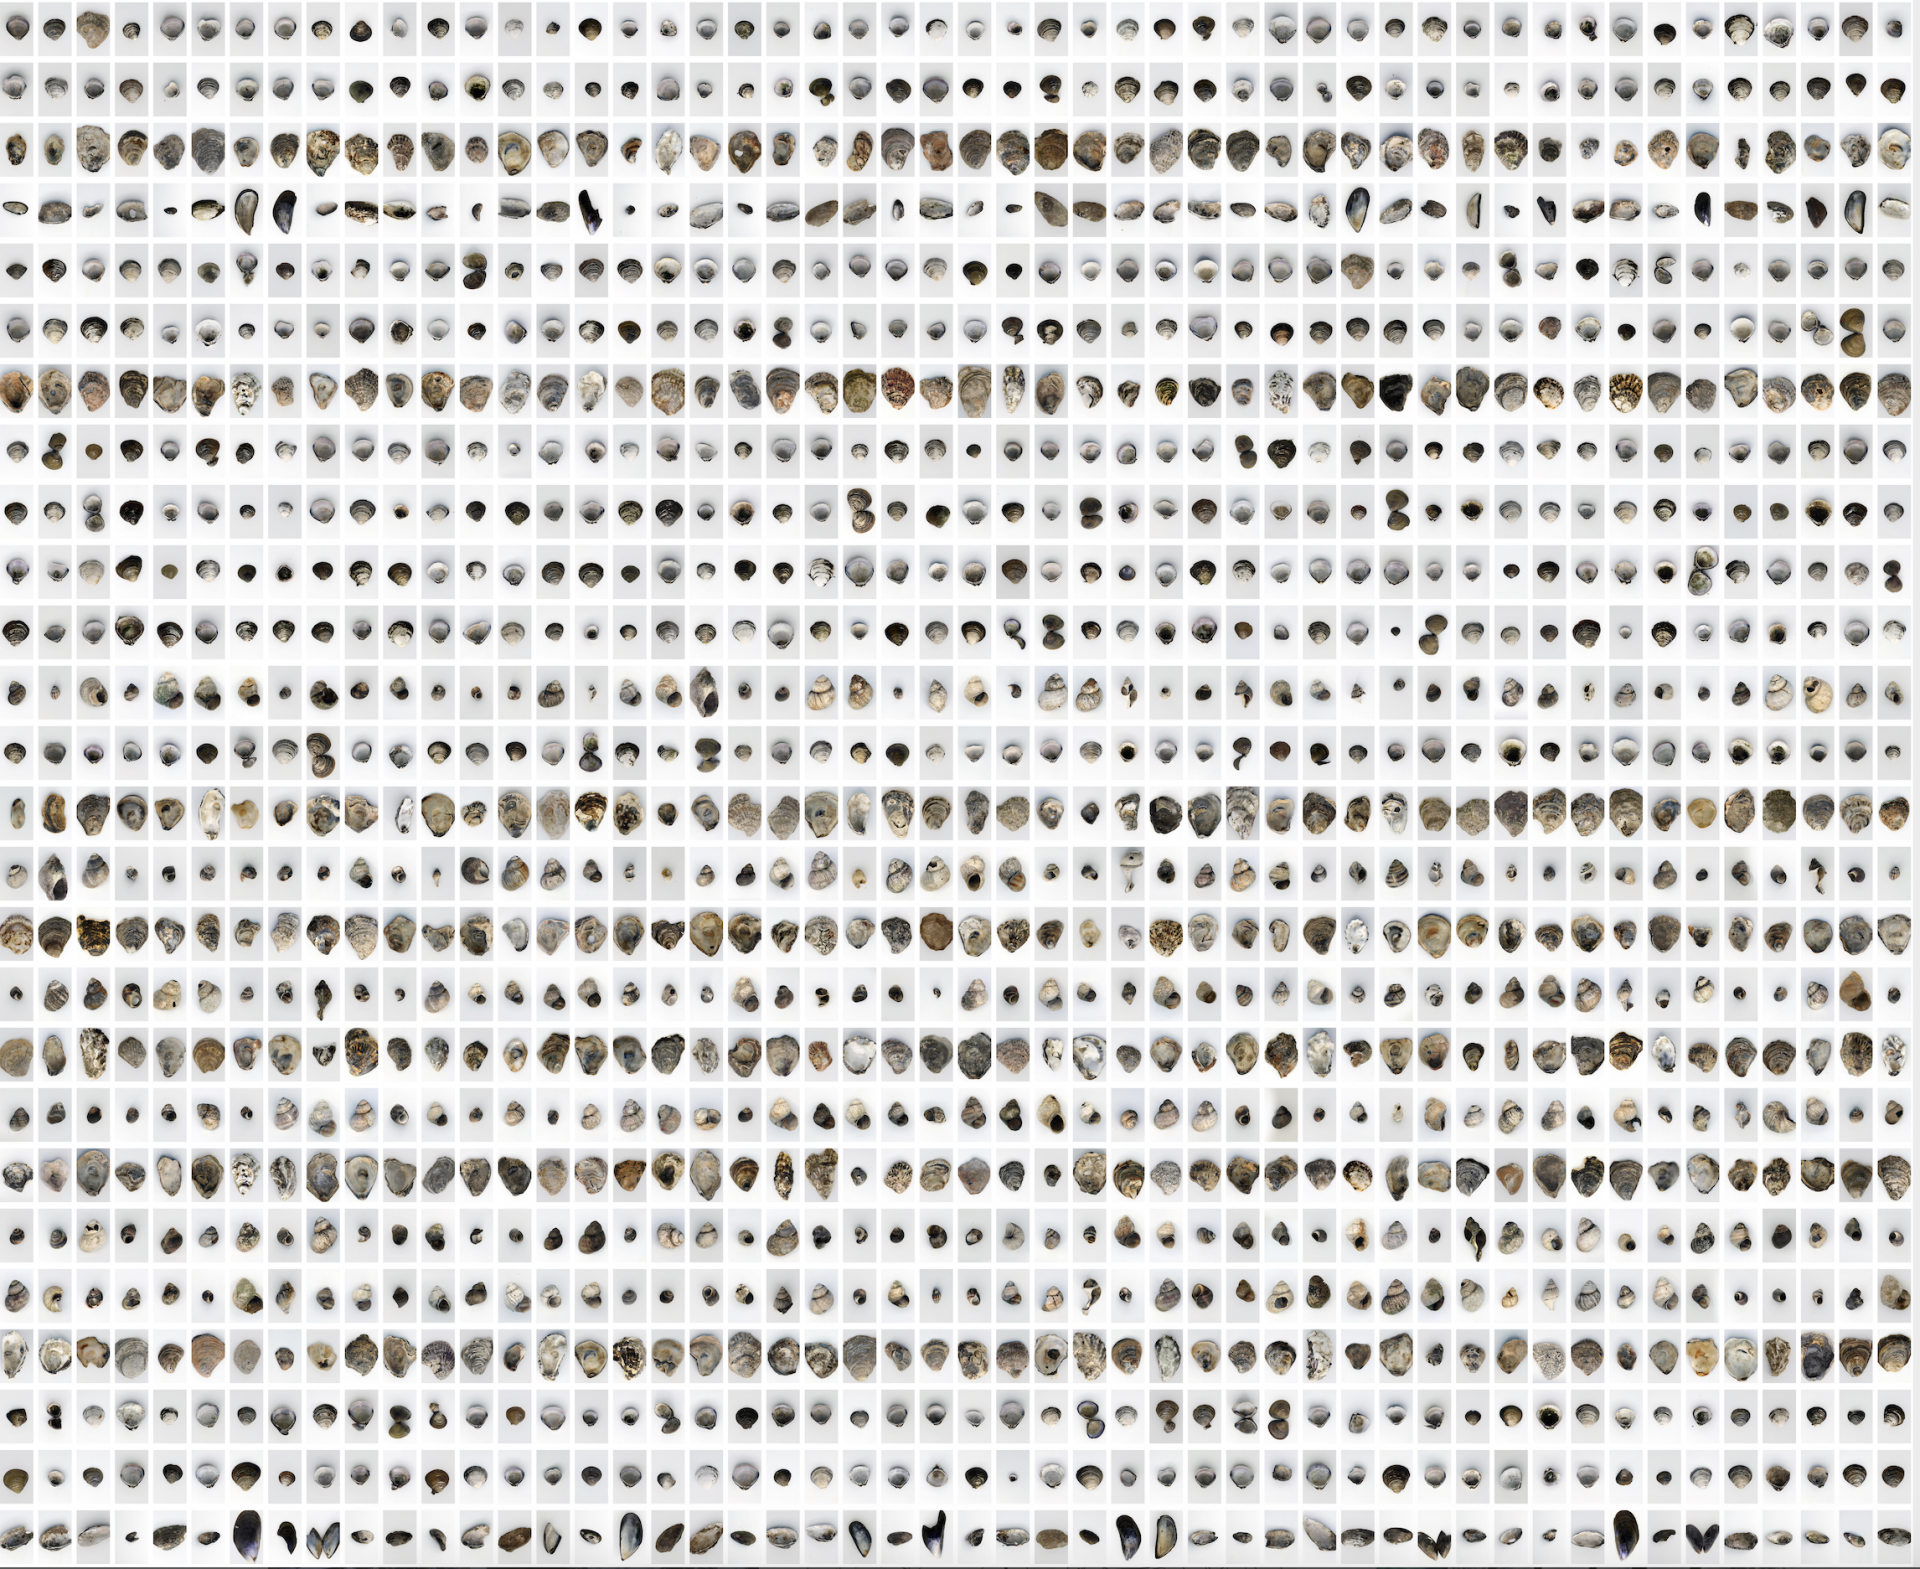 A large grid of images of shells colored various shades of gray